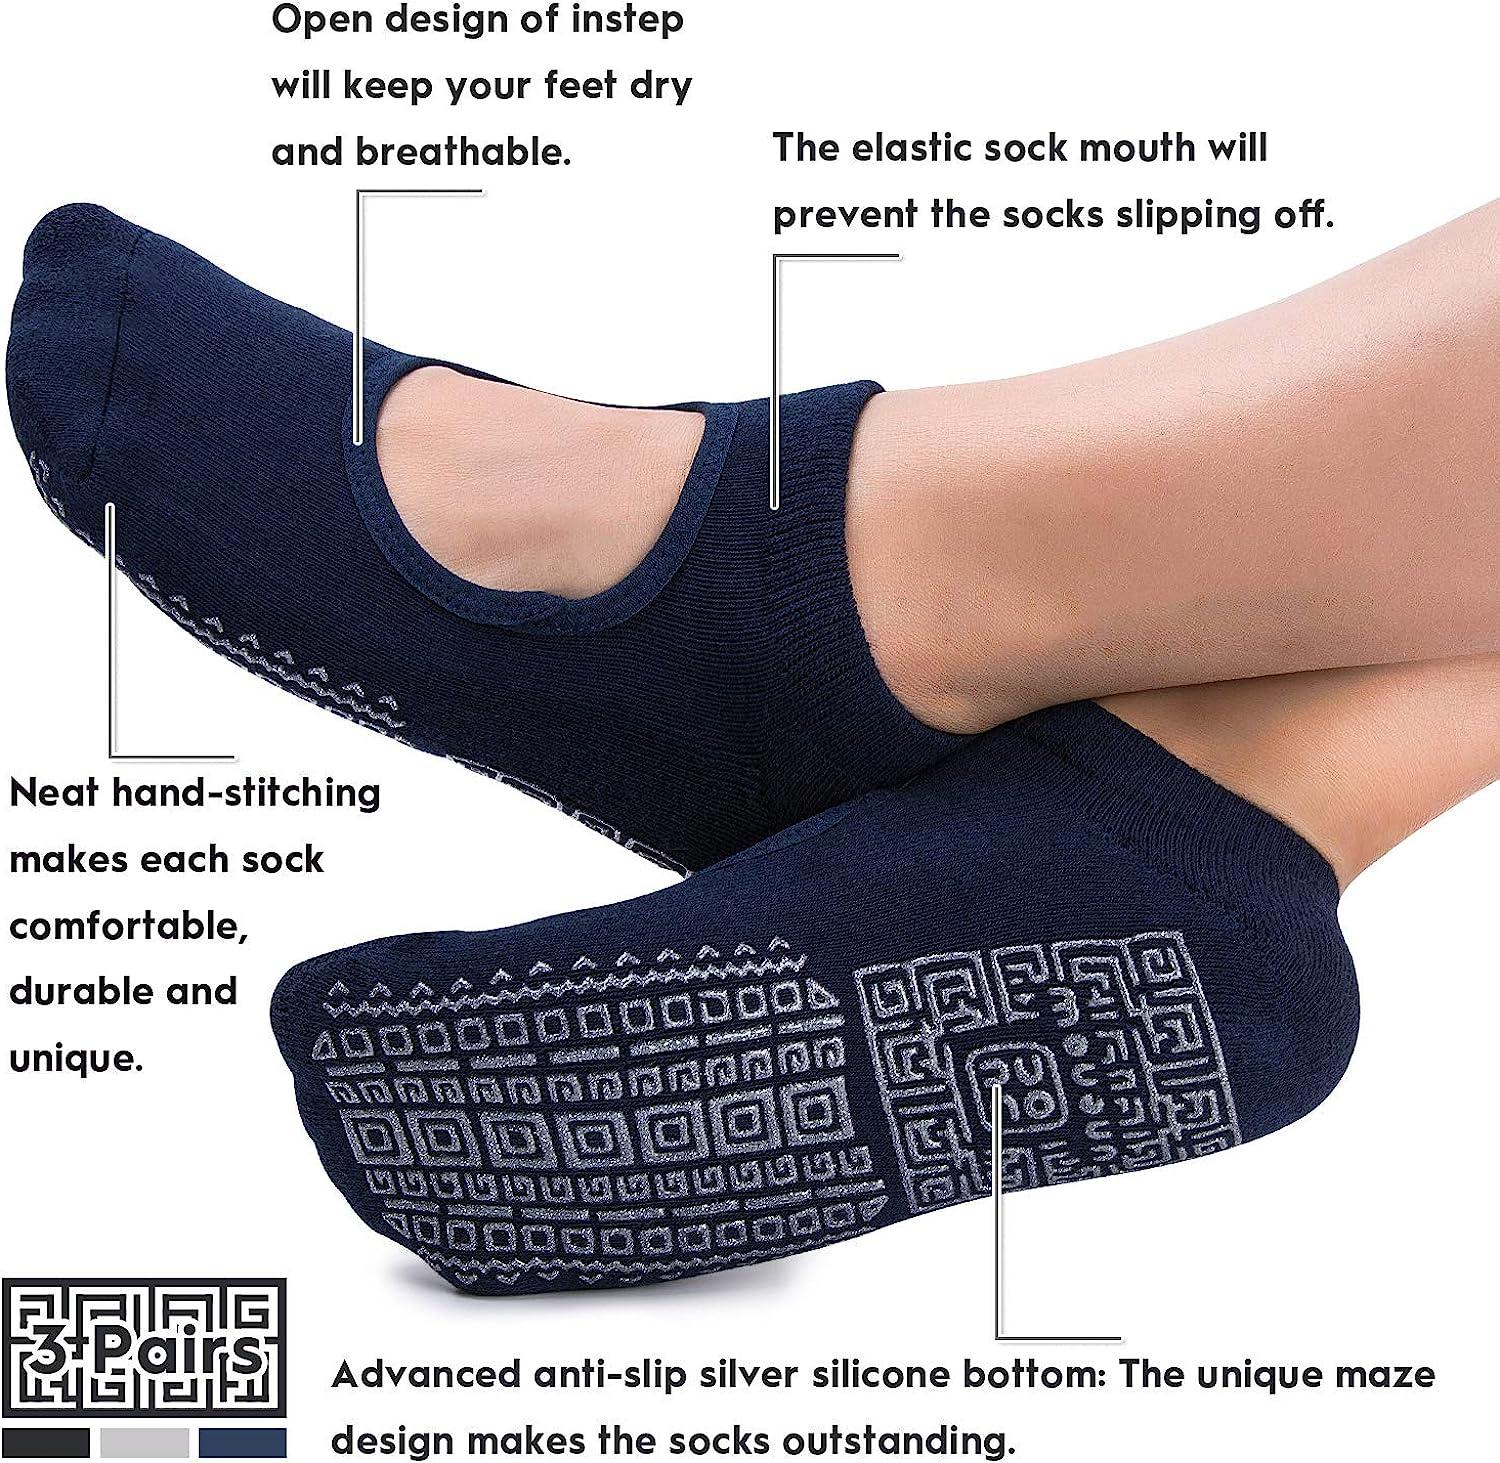 New Arrival Open Toe Yoga Socks With Anti-slip Silicone Sole For